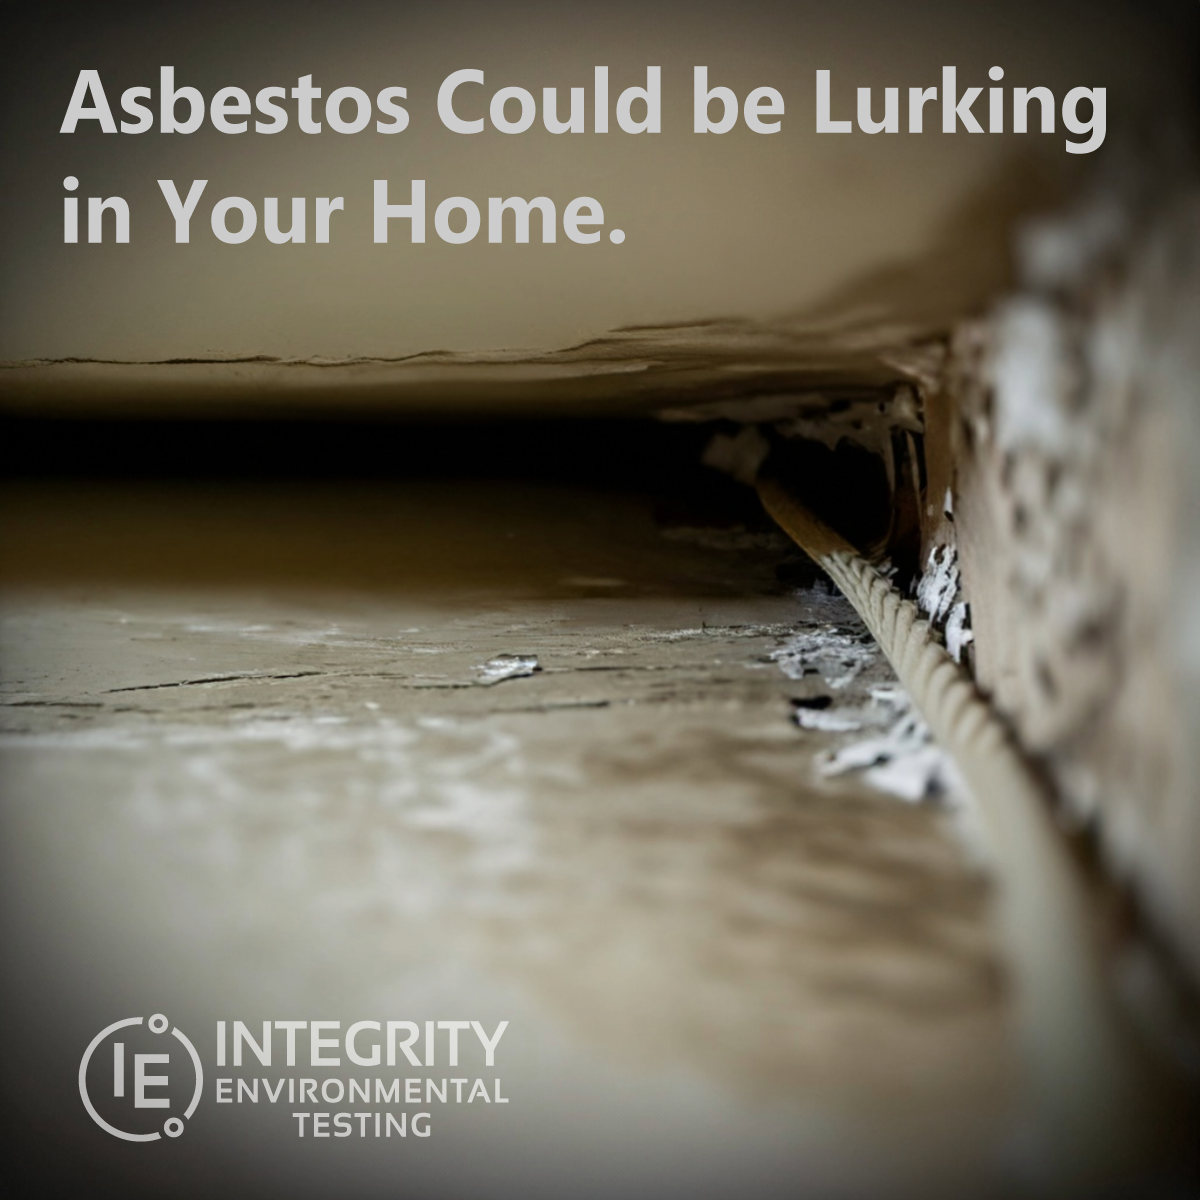 Asbestos Could be Lurking in Your Home